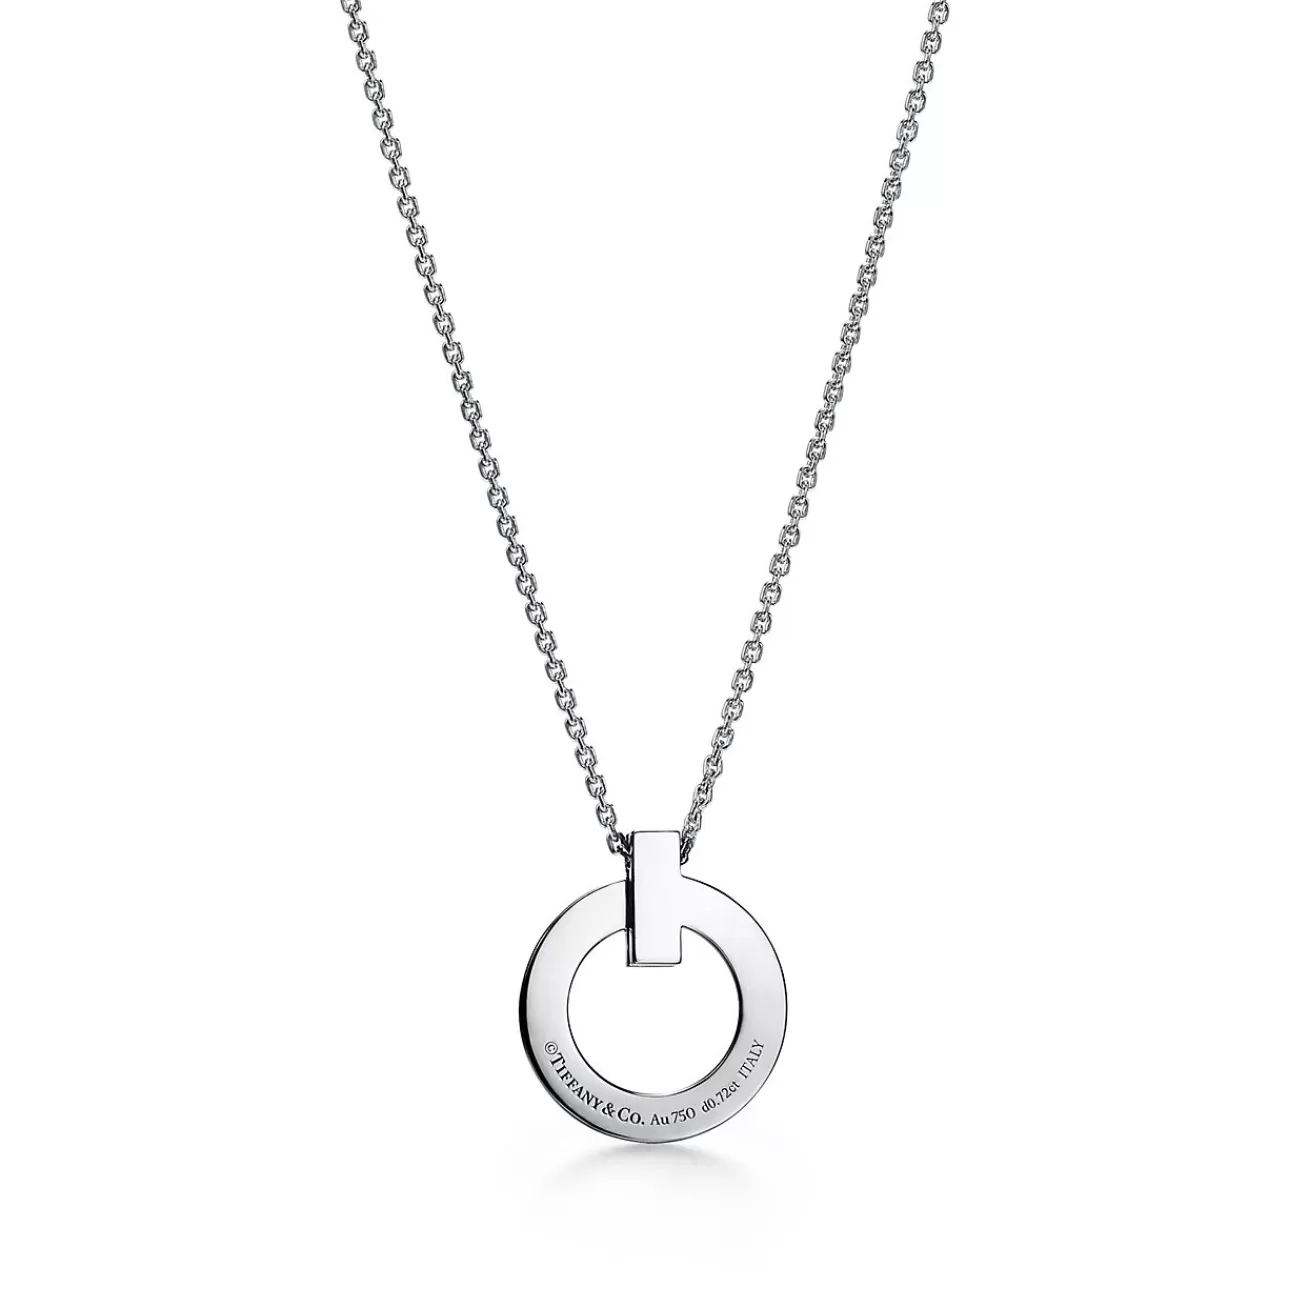 Tiffany & Co. Tiffany T T1 Circle Pendant in White Gold with Pavé Diamonds | ^ Necklaces & Pendants | Gifts for Her